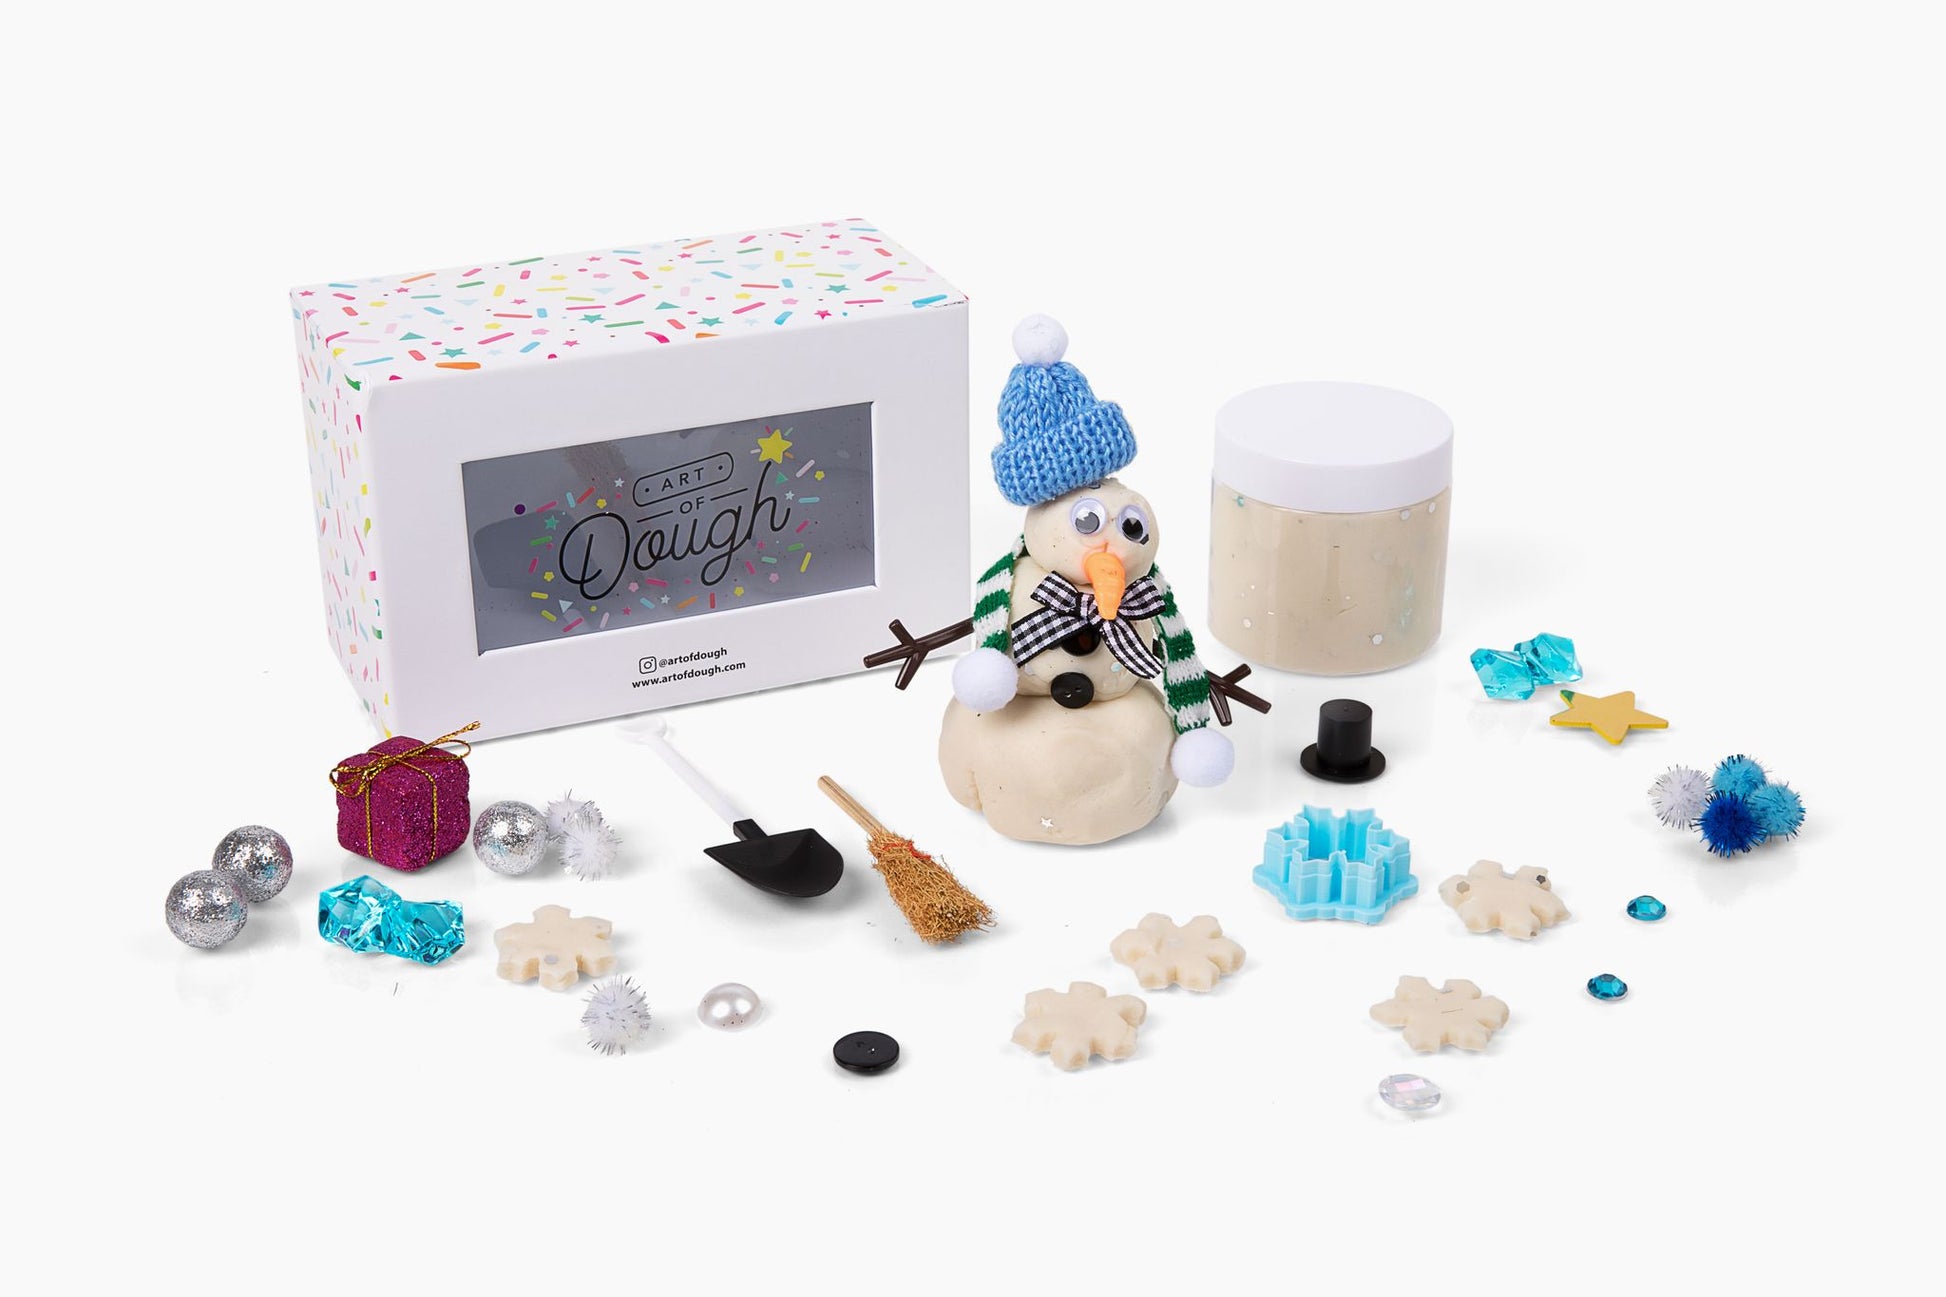 13 Piece Build-A-Snowman Kit - The Initial Design: gifts & monograms